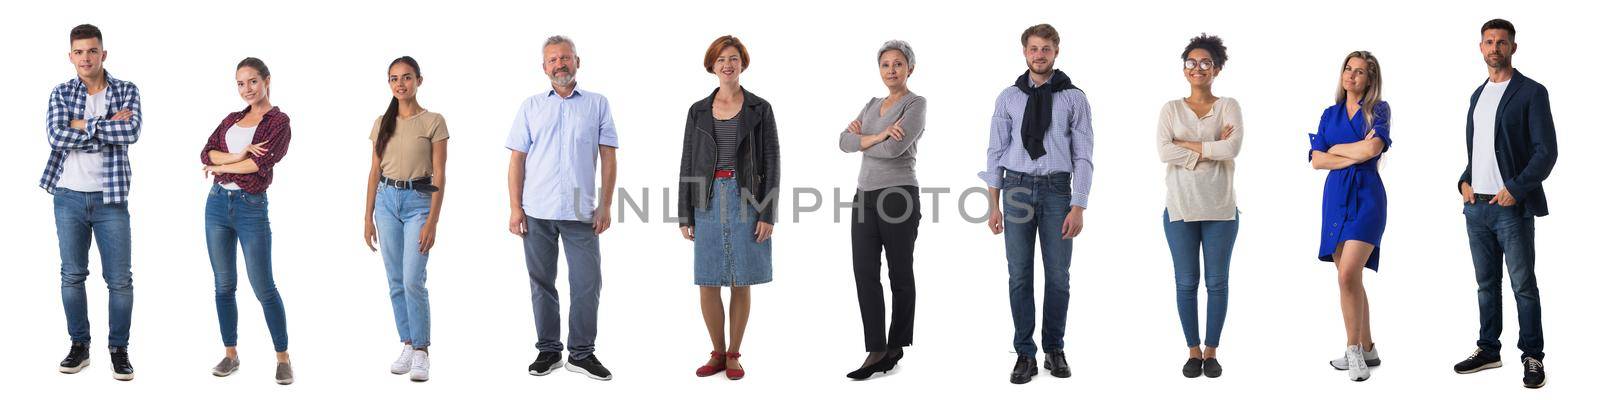 Full length portrait of people by ALotOfPeople